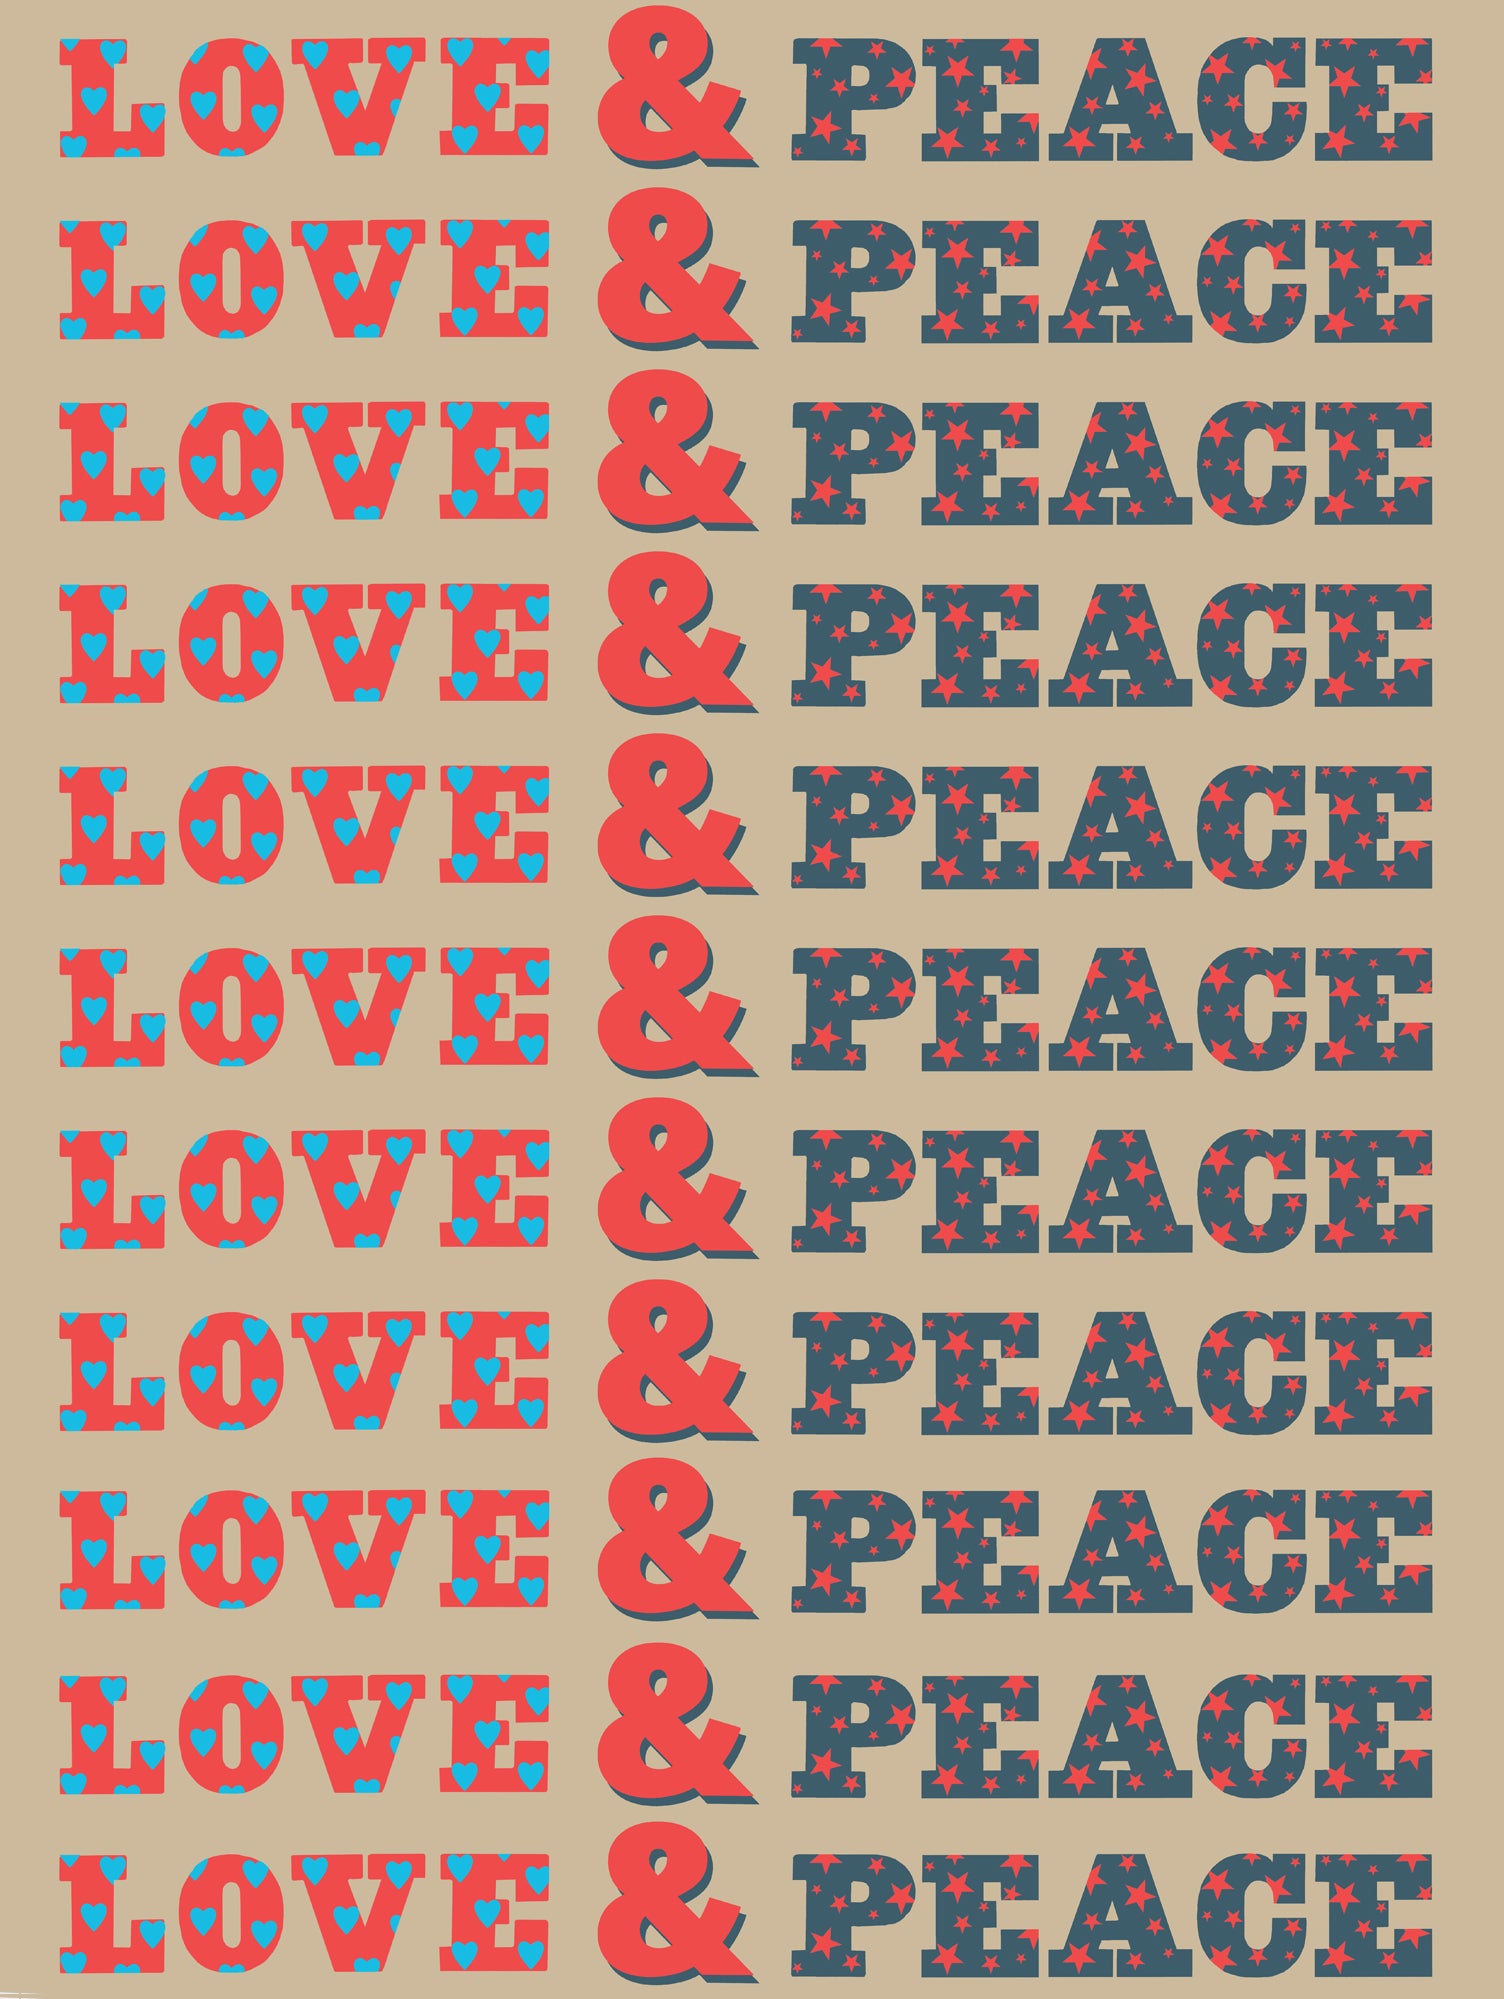 LOVE & peace wrapping paper